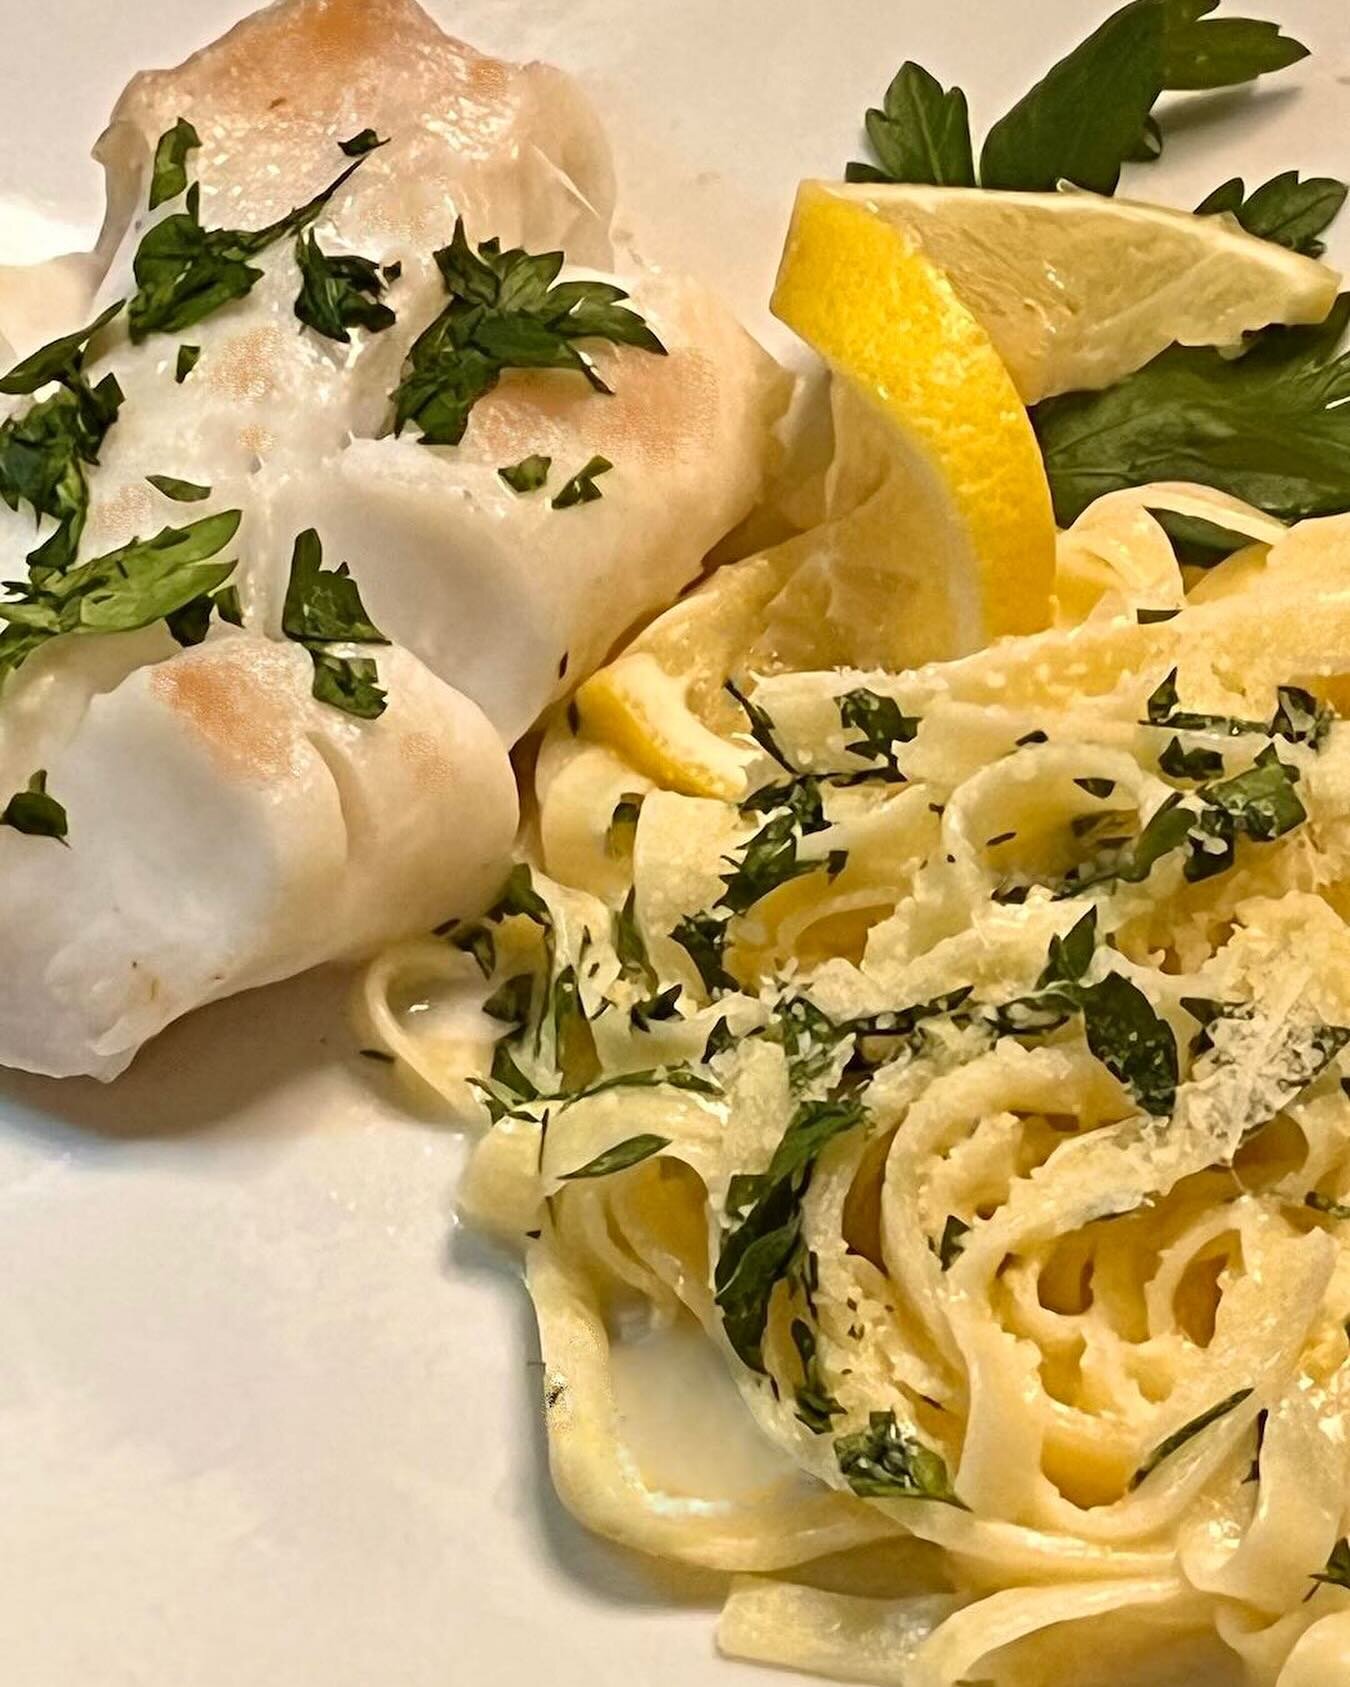 You don&rsquo;t need to be an expert home chef to create an easy and elegant meal. This week in #taste_budding: a simple broiled cod + lemony pasta = a simply delicious meal. From &ldquo;Rachael Ray&rsquo;s Open House Cookbook.&rdquo; Follow profile 